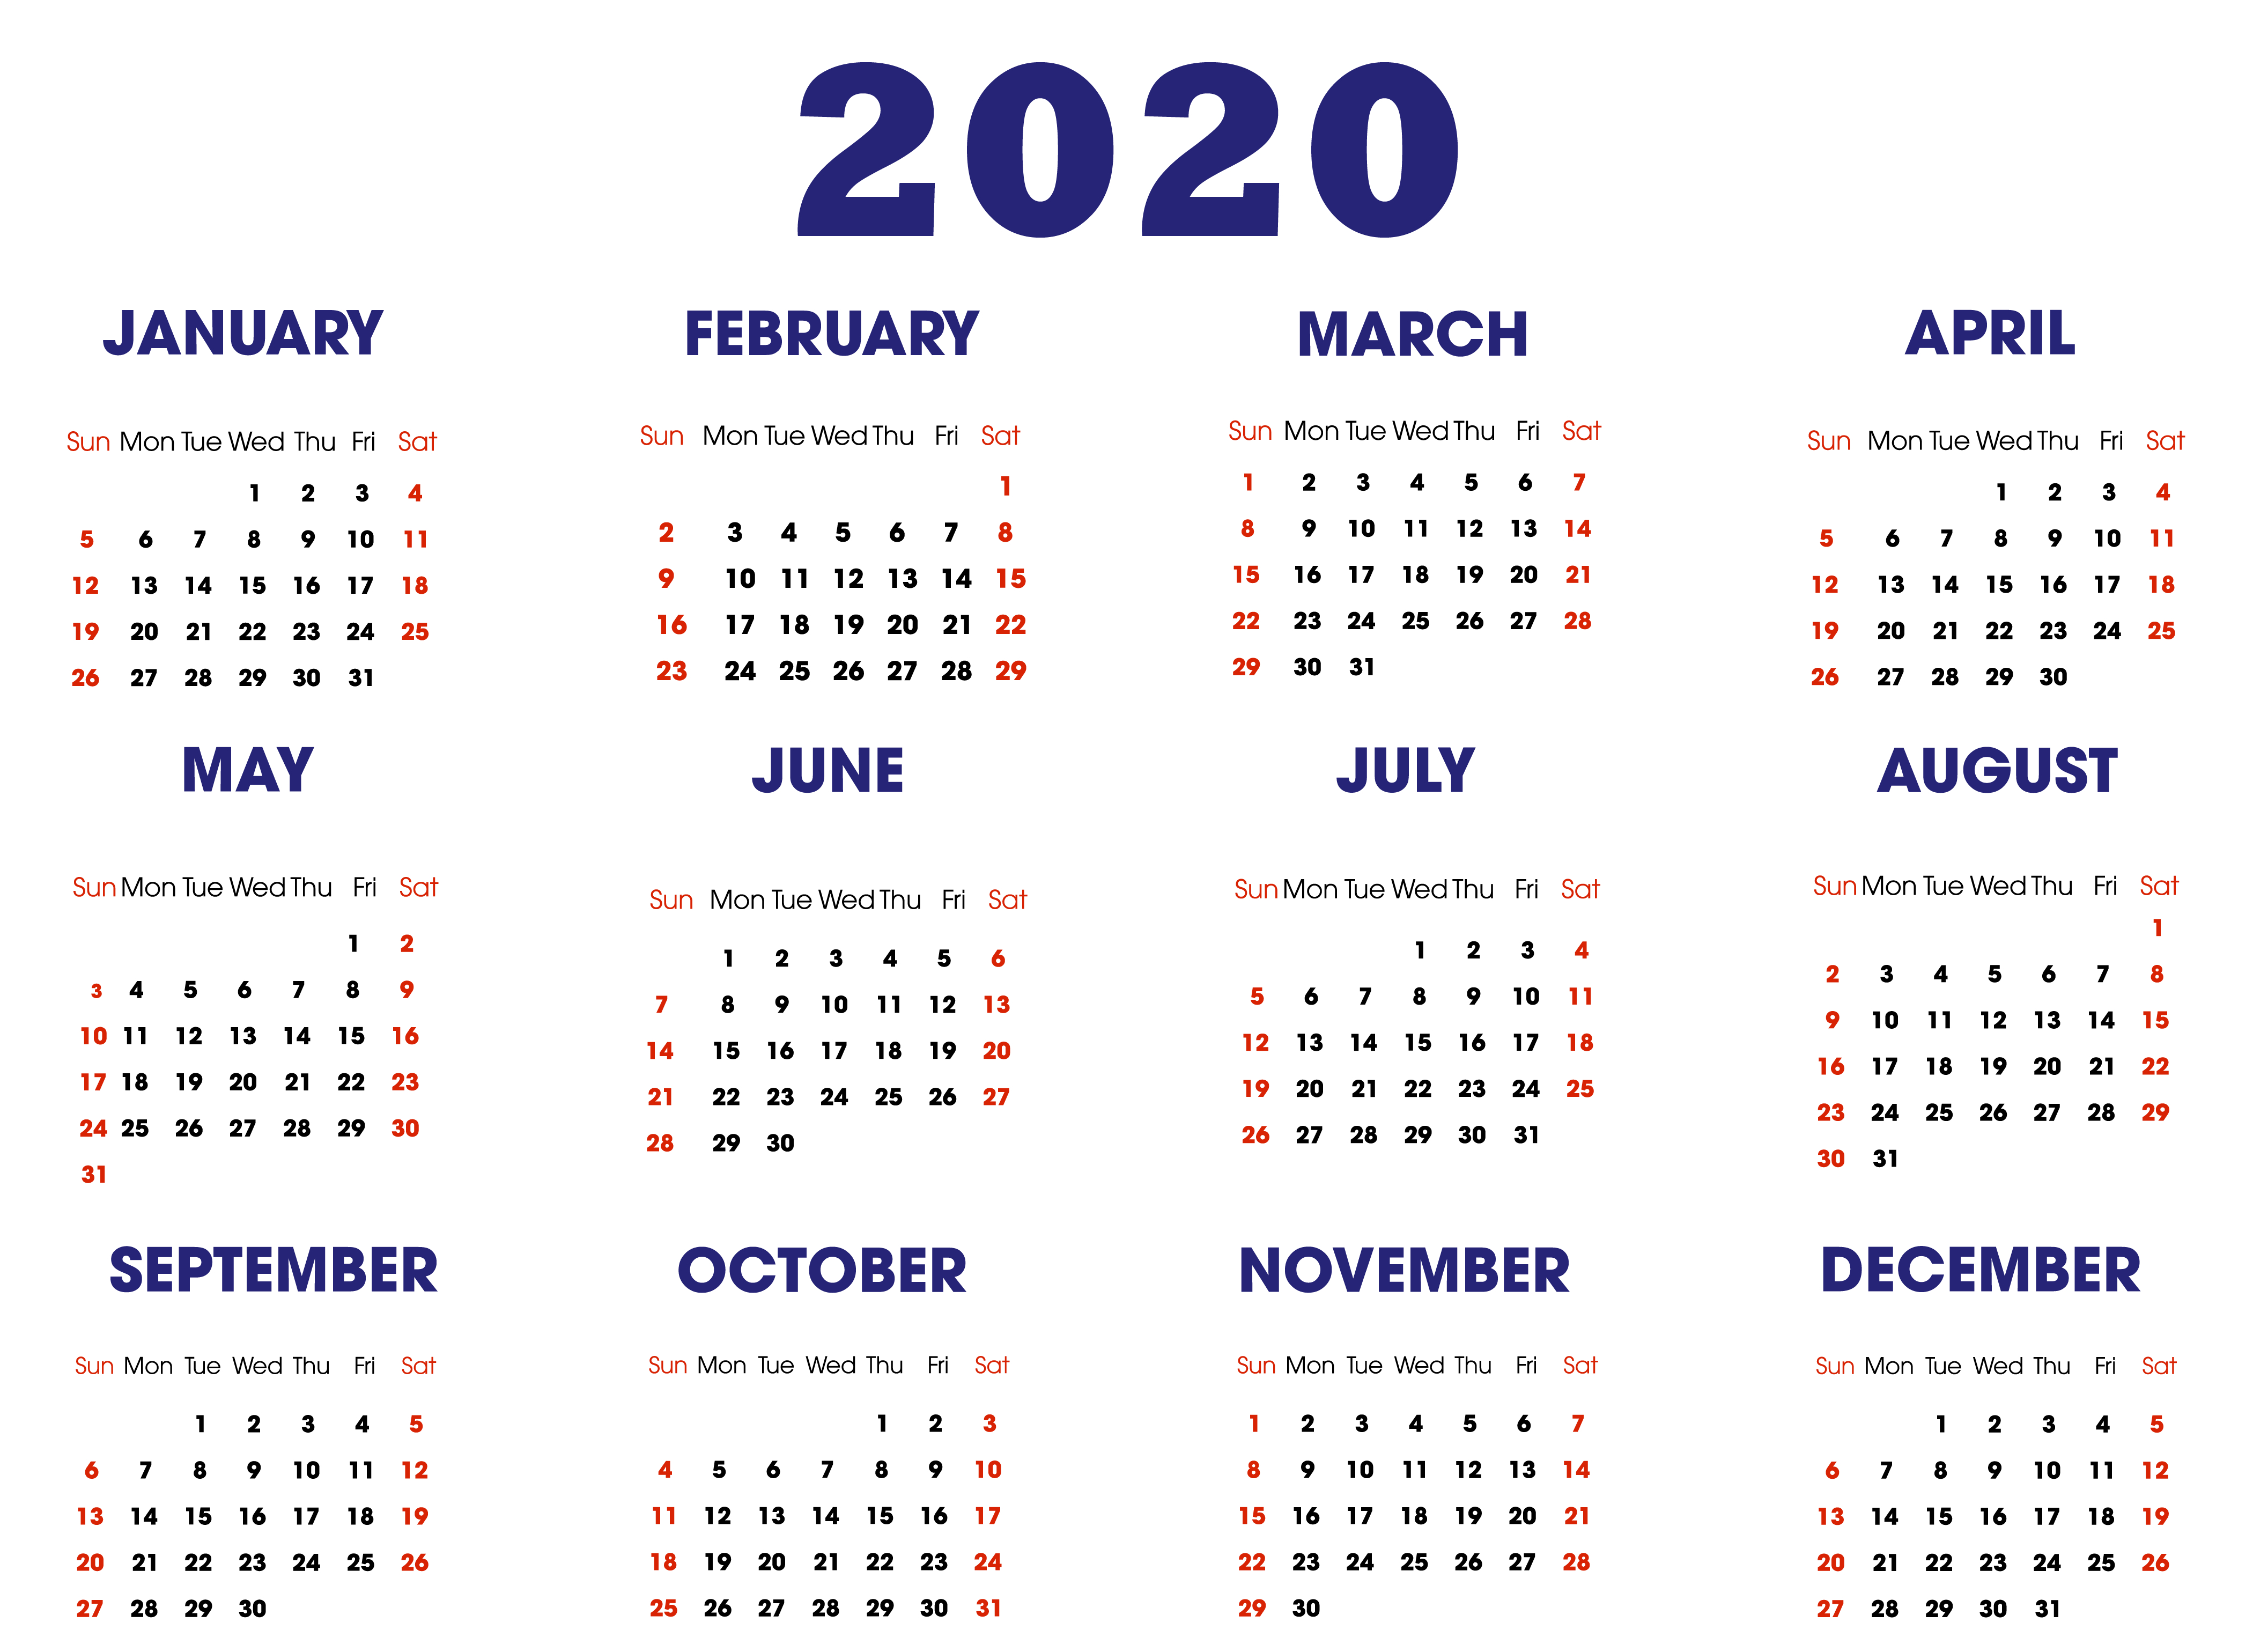 2020 Calendar Template | Printable Calendar Template, Free intended for Printable Calendar 2020 With Time Slots